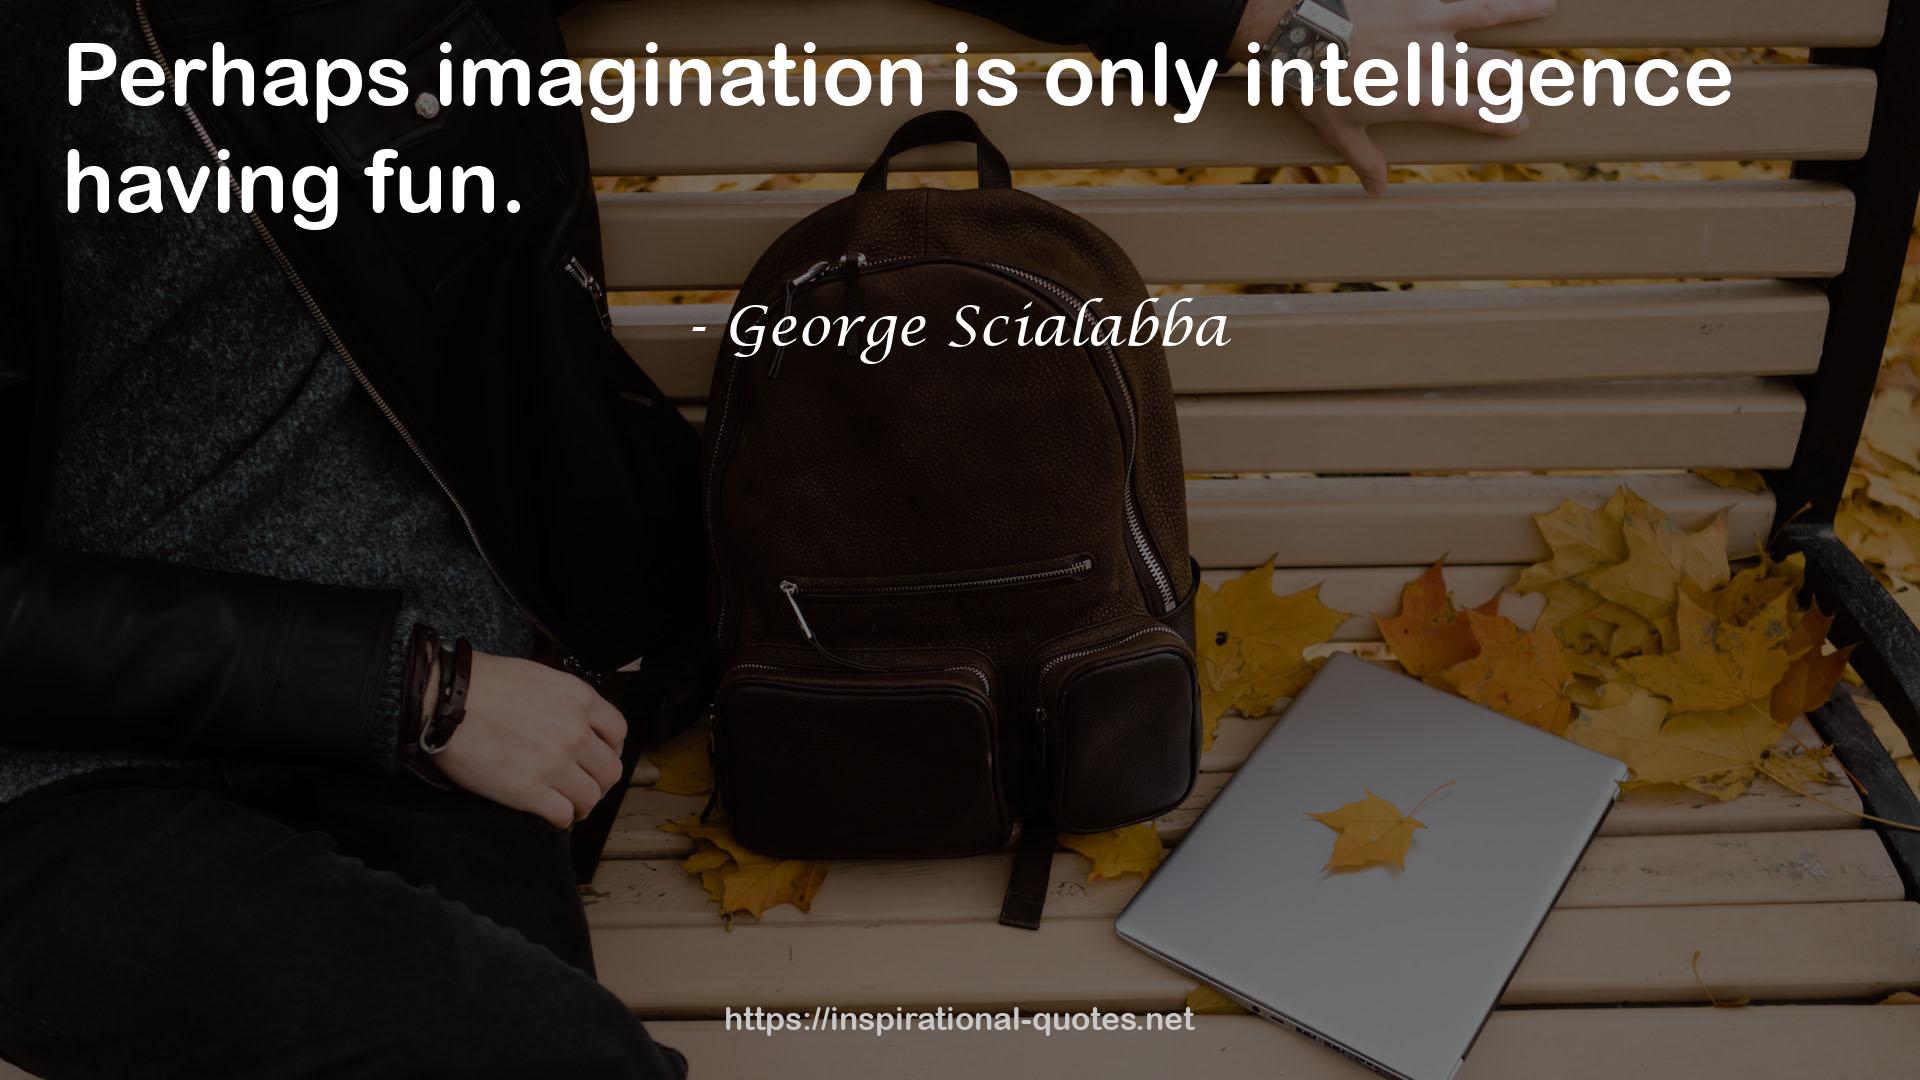 George Scialabba QUOTES